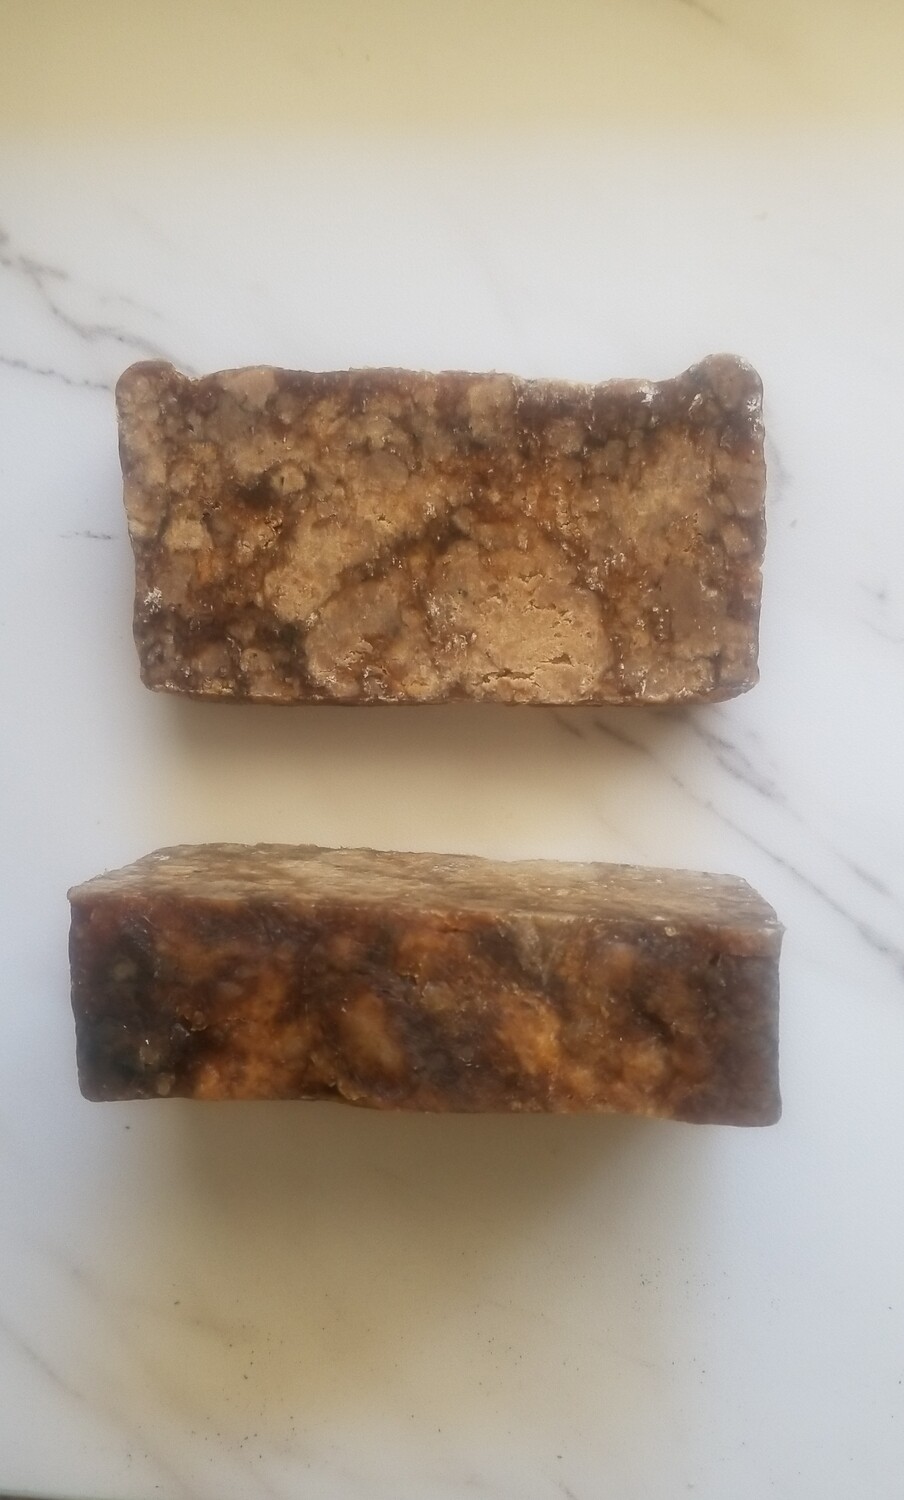 100% African Black Soap